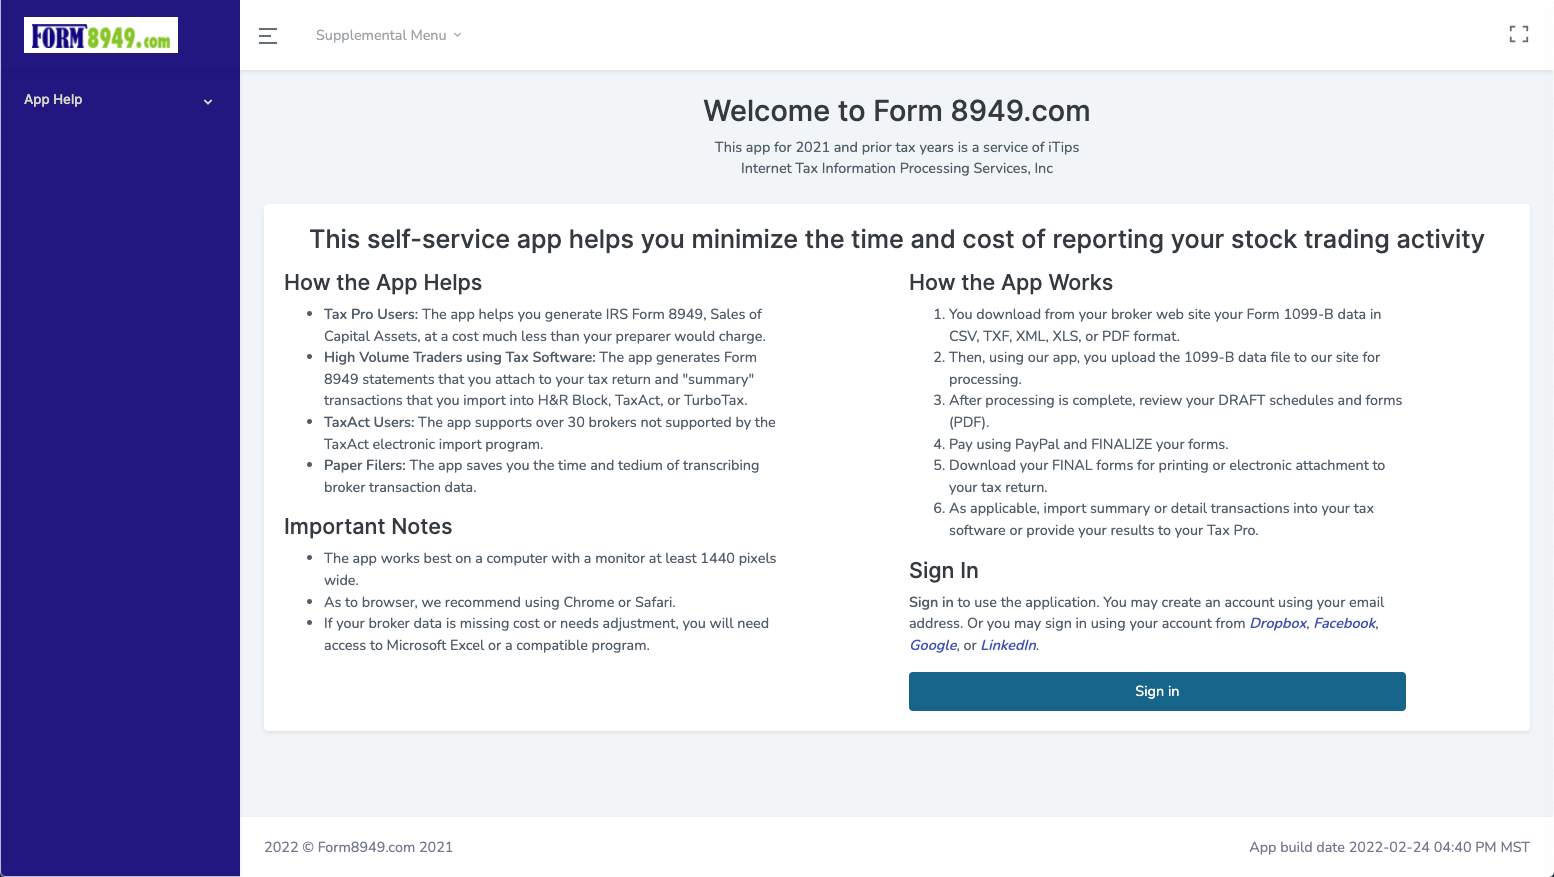 Welcome Page of Form 8949 App